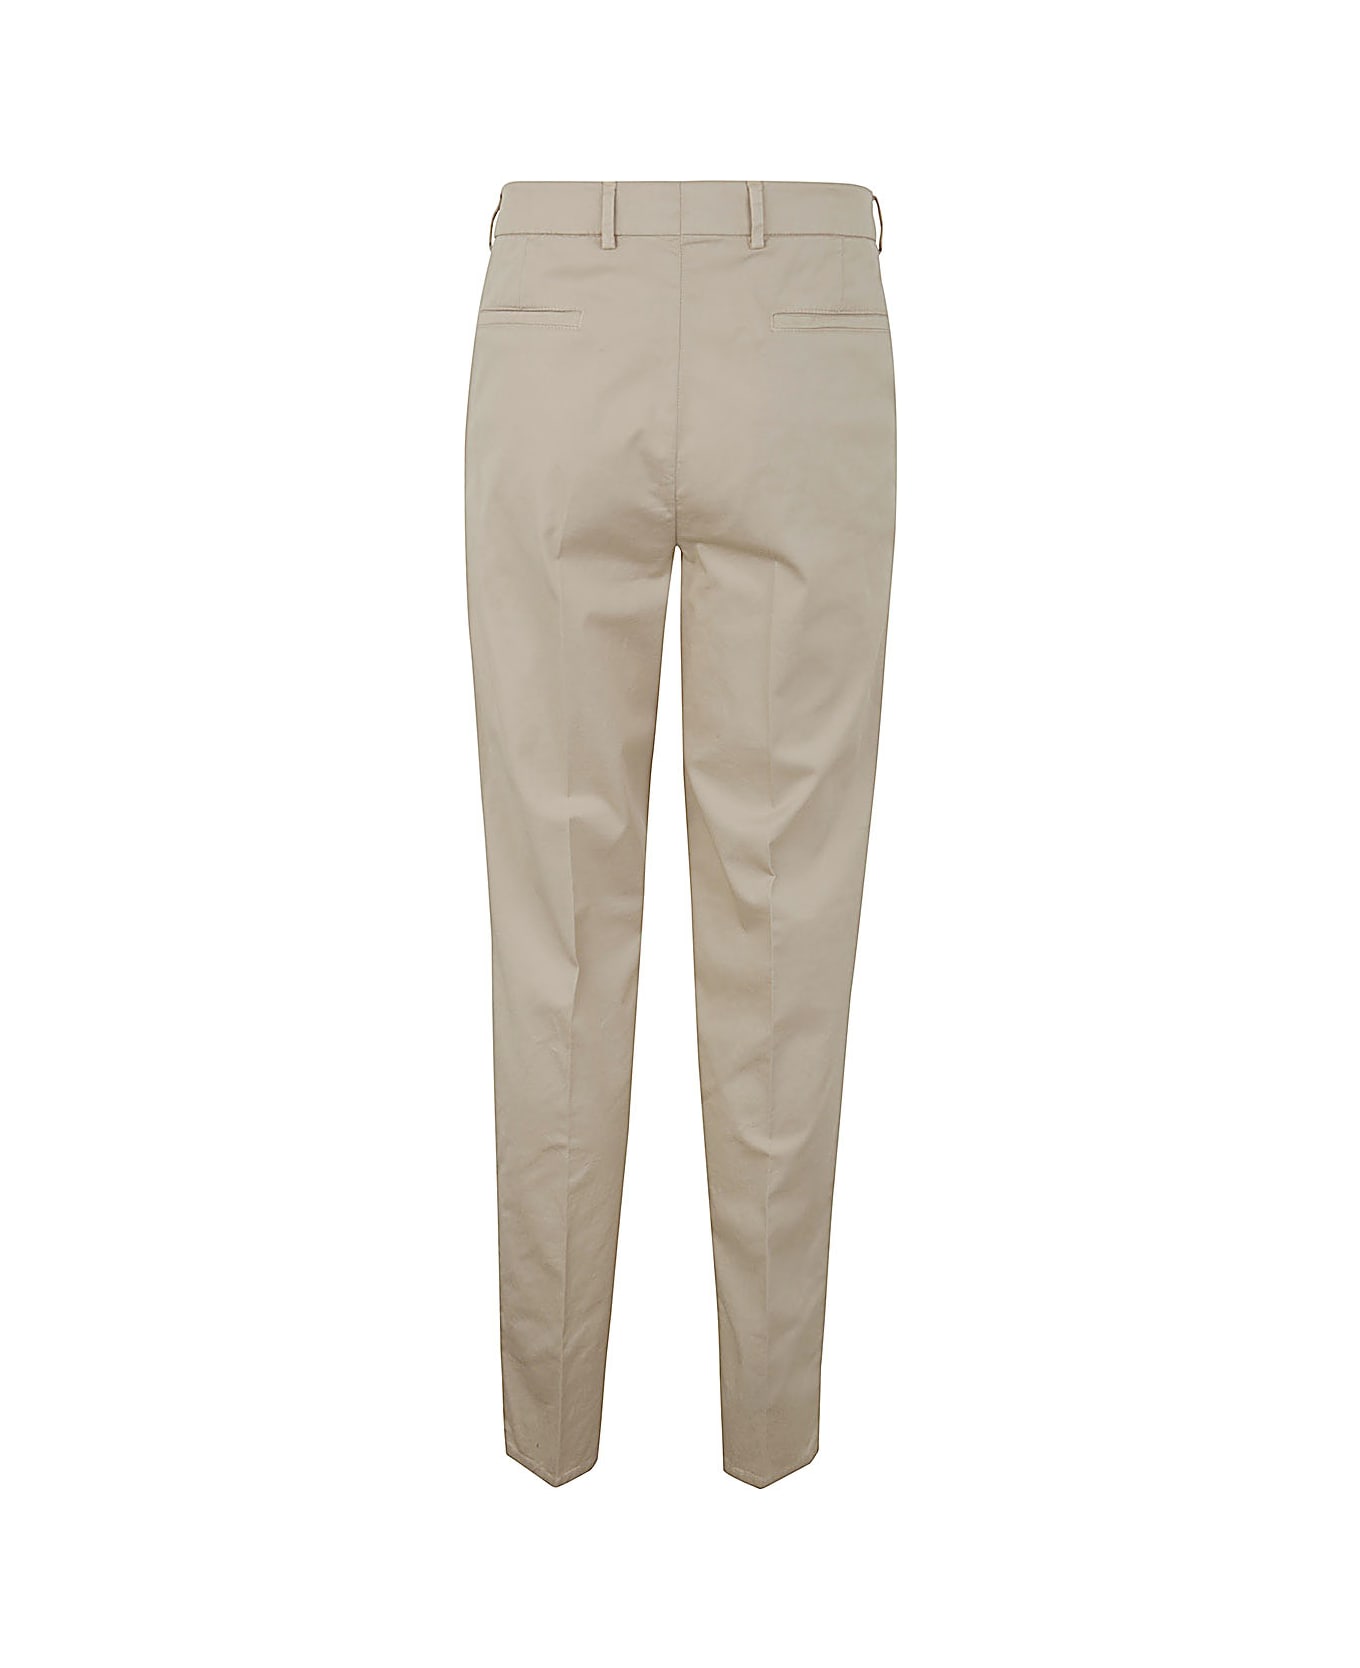 Brunello Cucinelli Dyed Pants - Linen Seed